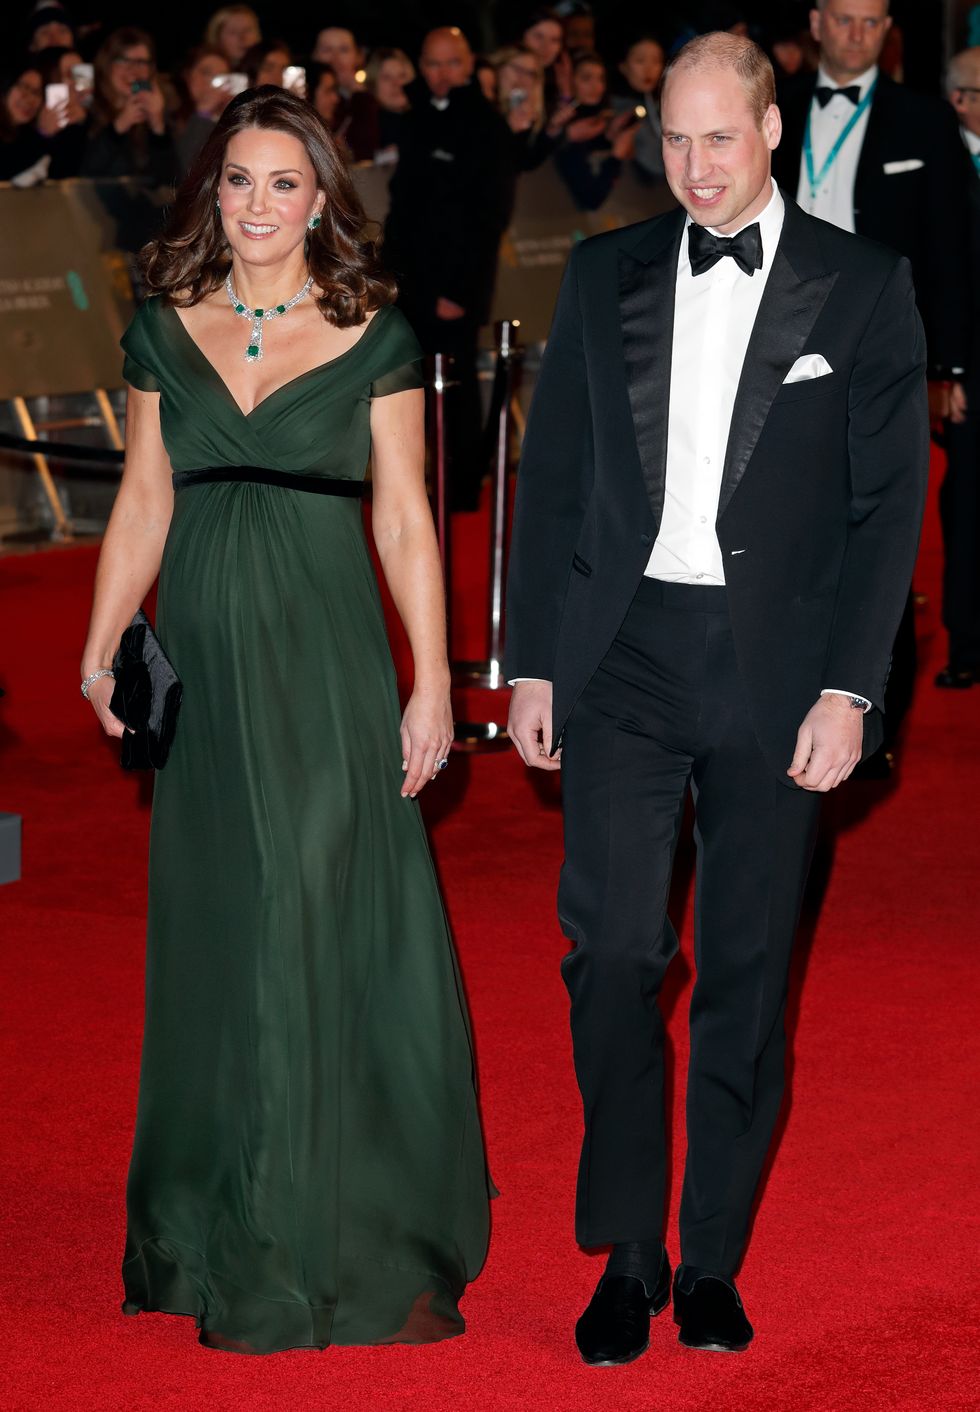 the duke and duchess of cambridge attend the ee british academy film awards